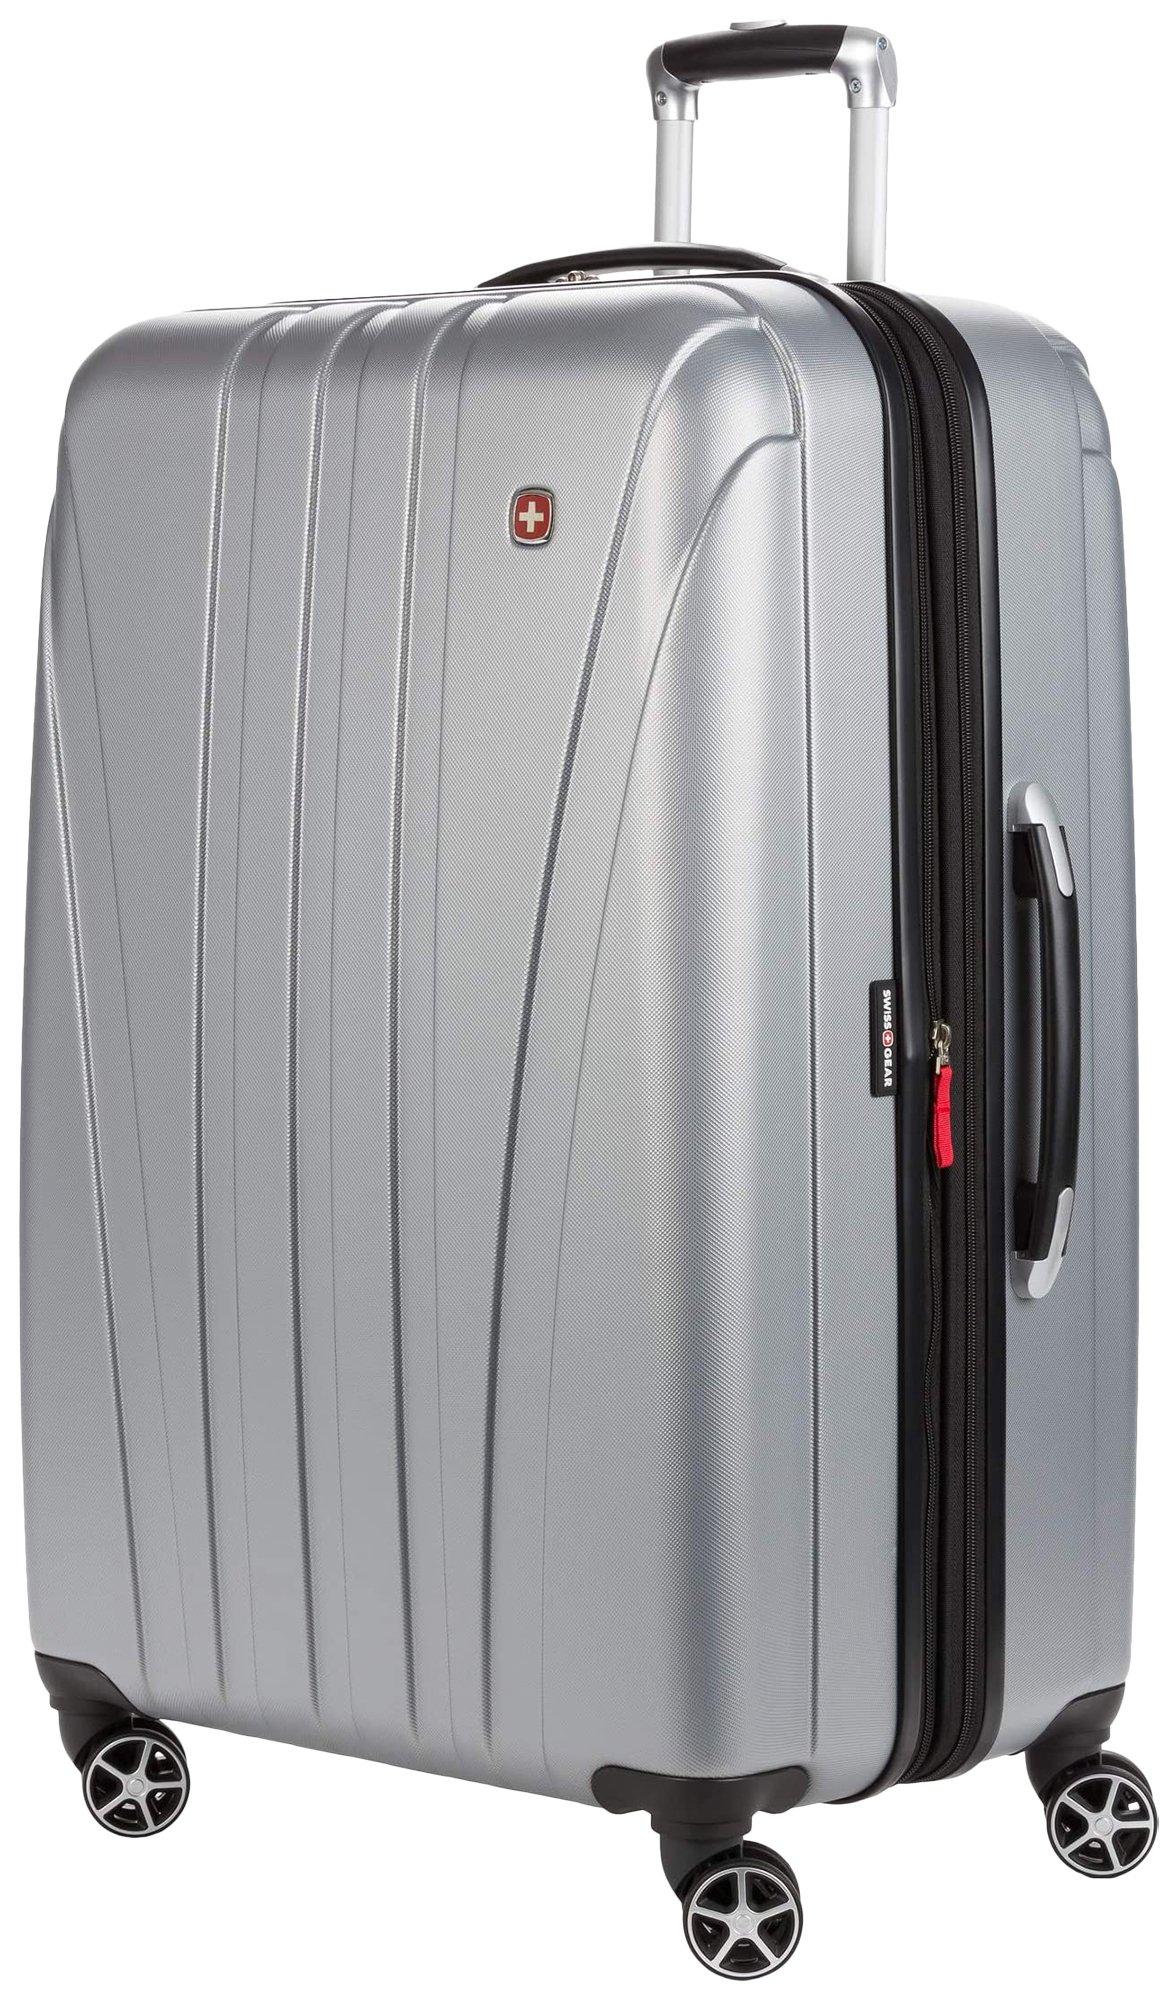 Swiss Gear 28'' Expandable Hardside Spinner Luggage